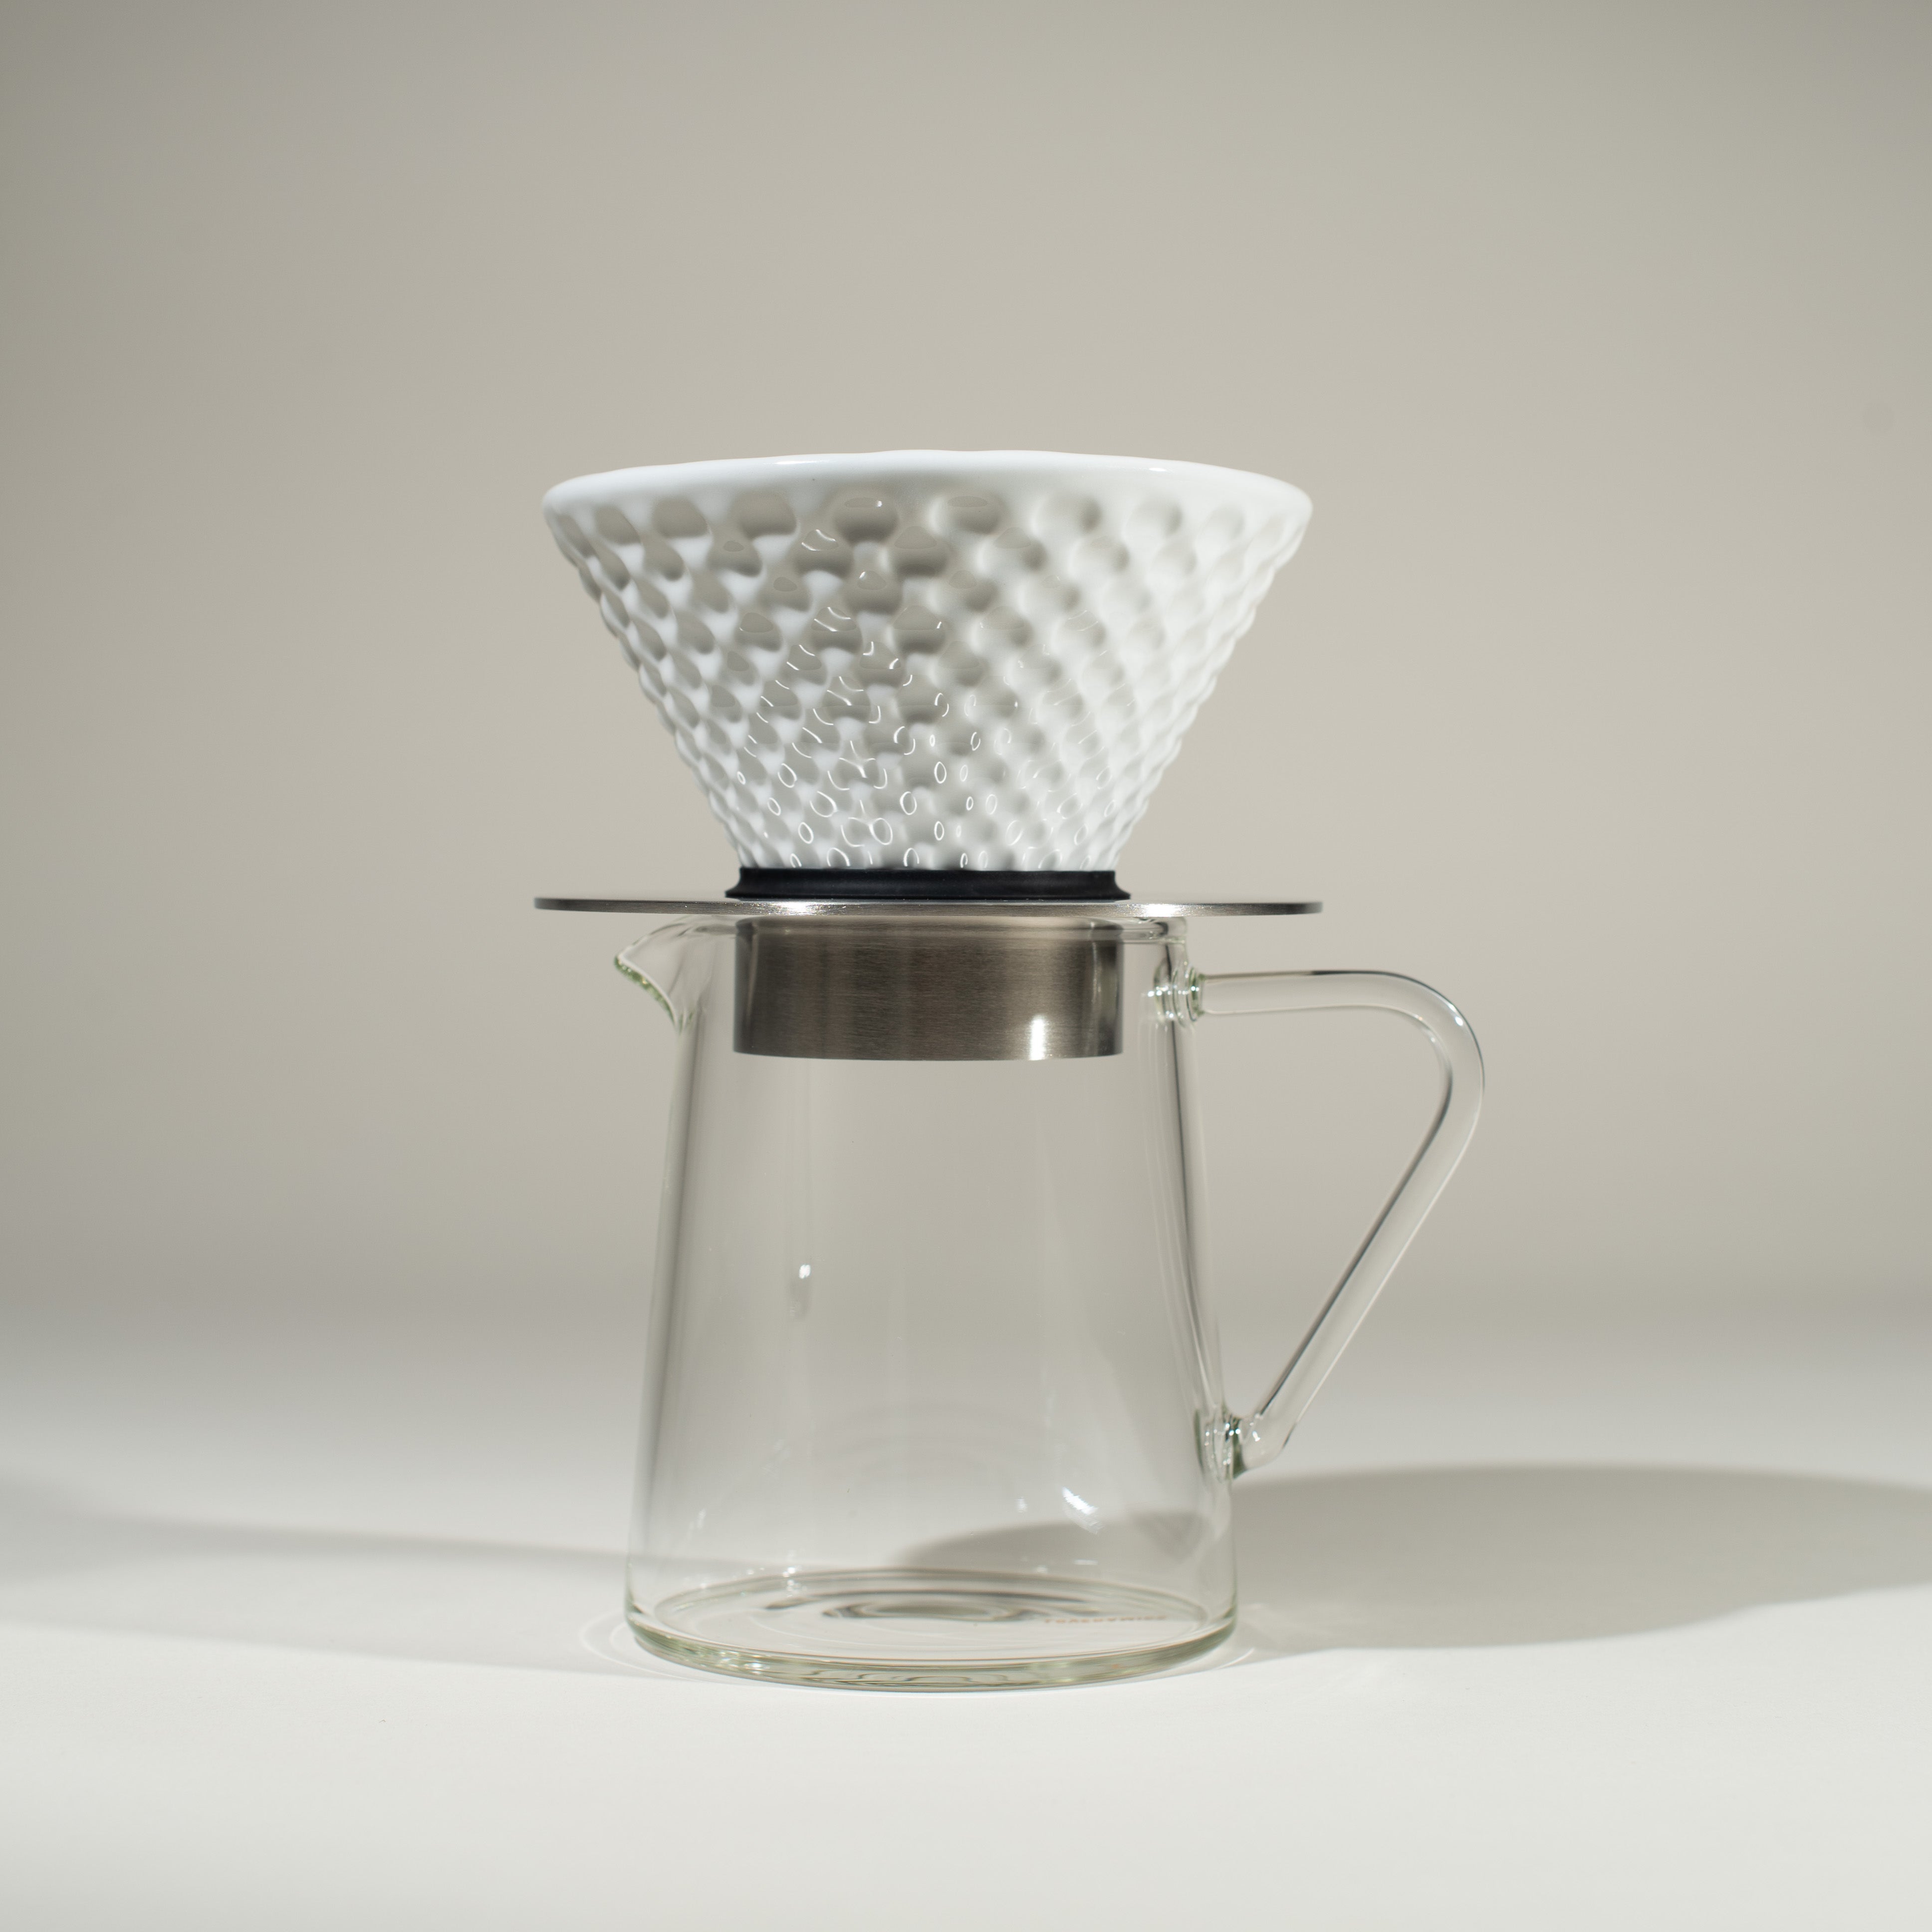 Glass is heat proof. Works with the Brewers Dripping Stand, or just the Drippers alone. Featured is the dripper with the base on top of the carafe.